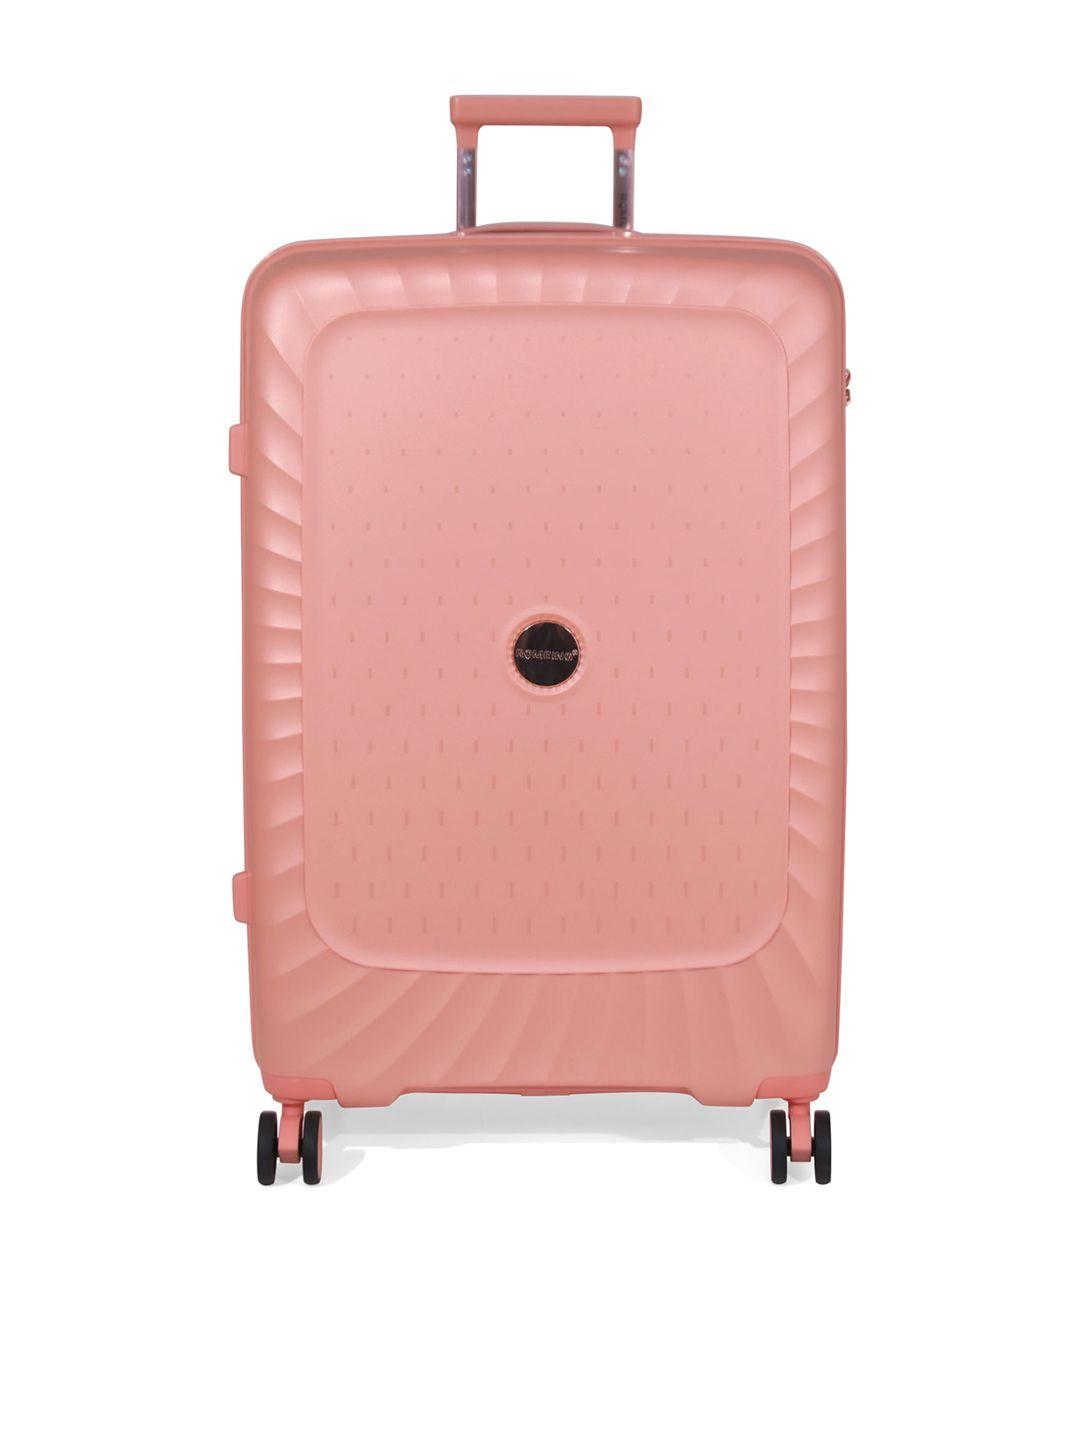 romeing textured hard-sided large trolley suitcase